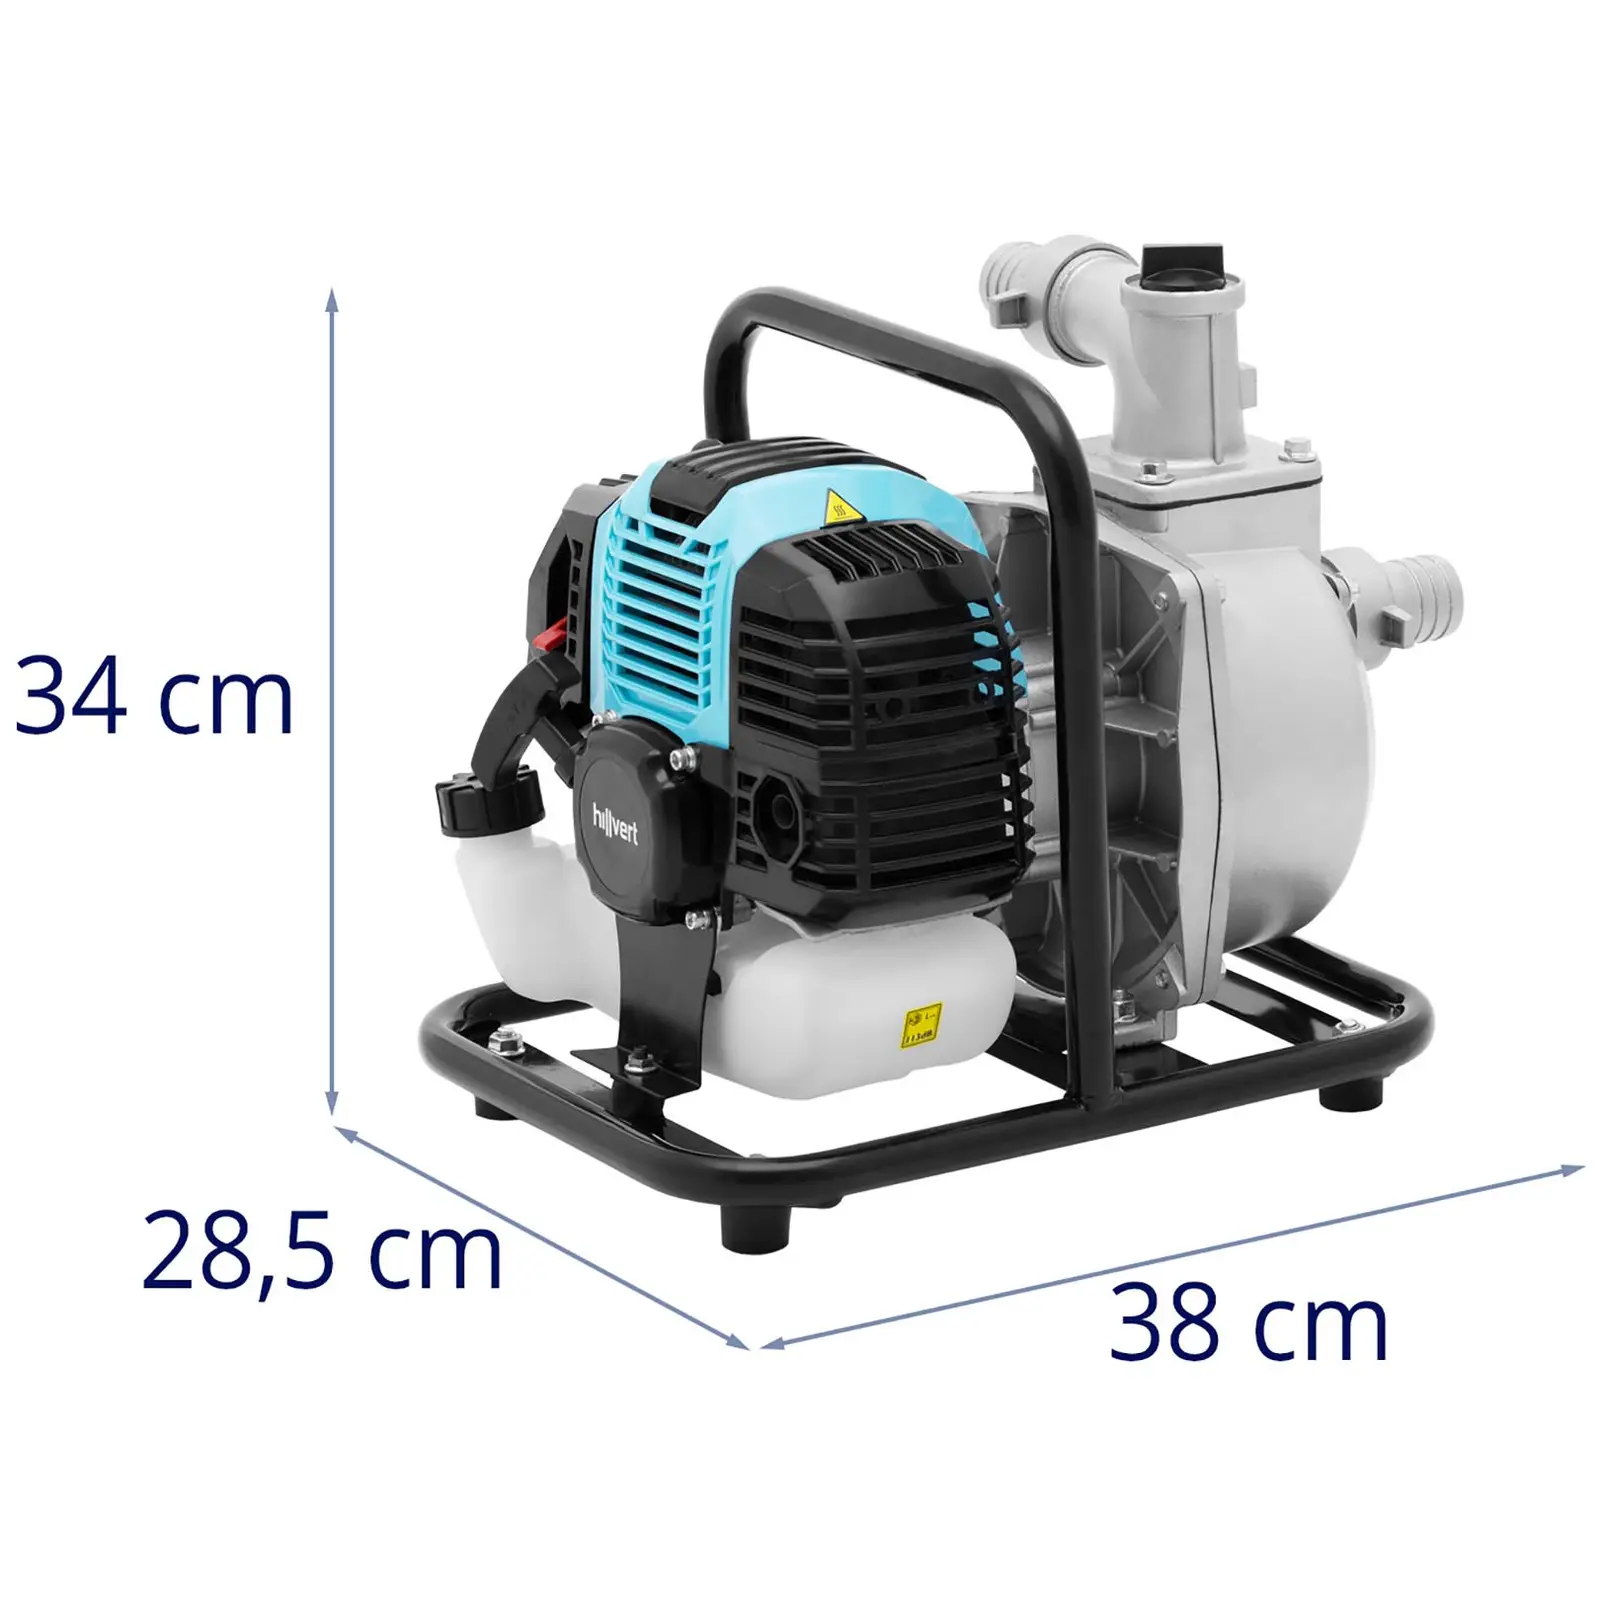 Water pump - 1.35 kW - 15 m³/h - with flat hose - 1 1/2" - 50 m - 0 - 7 bar